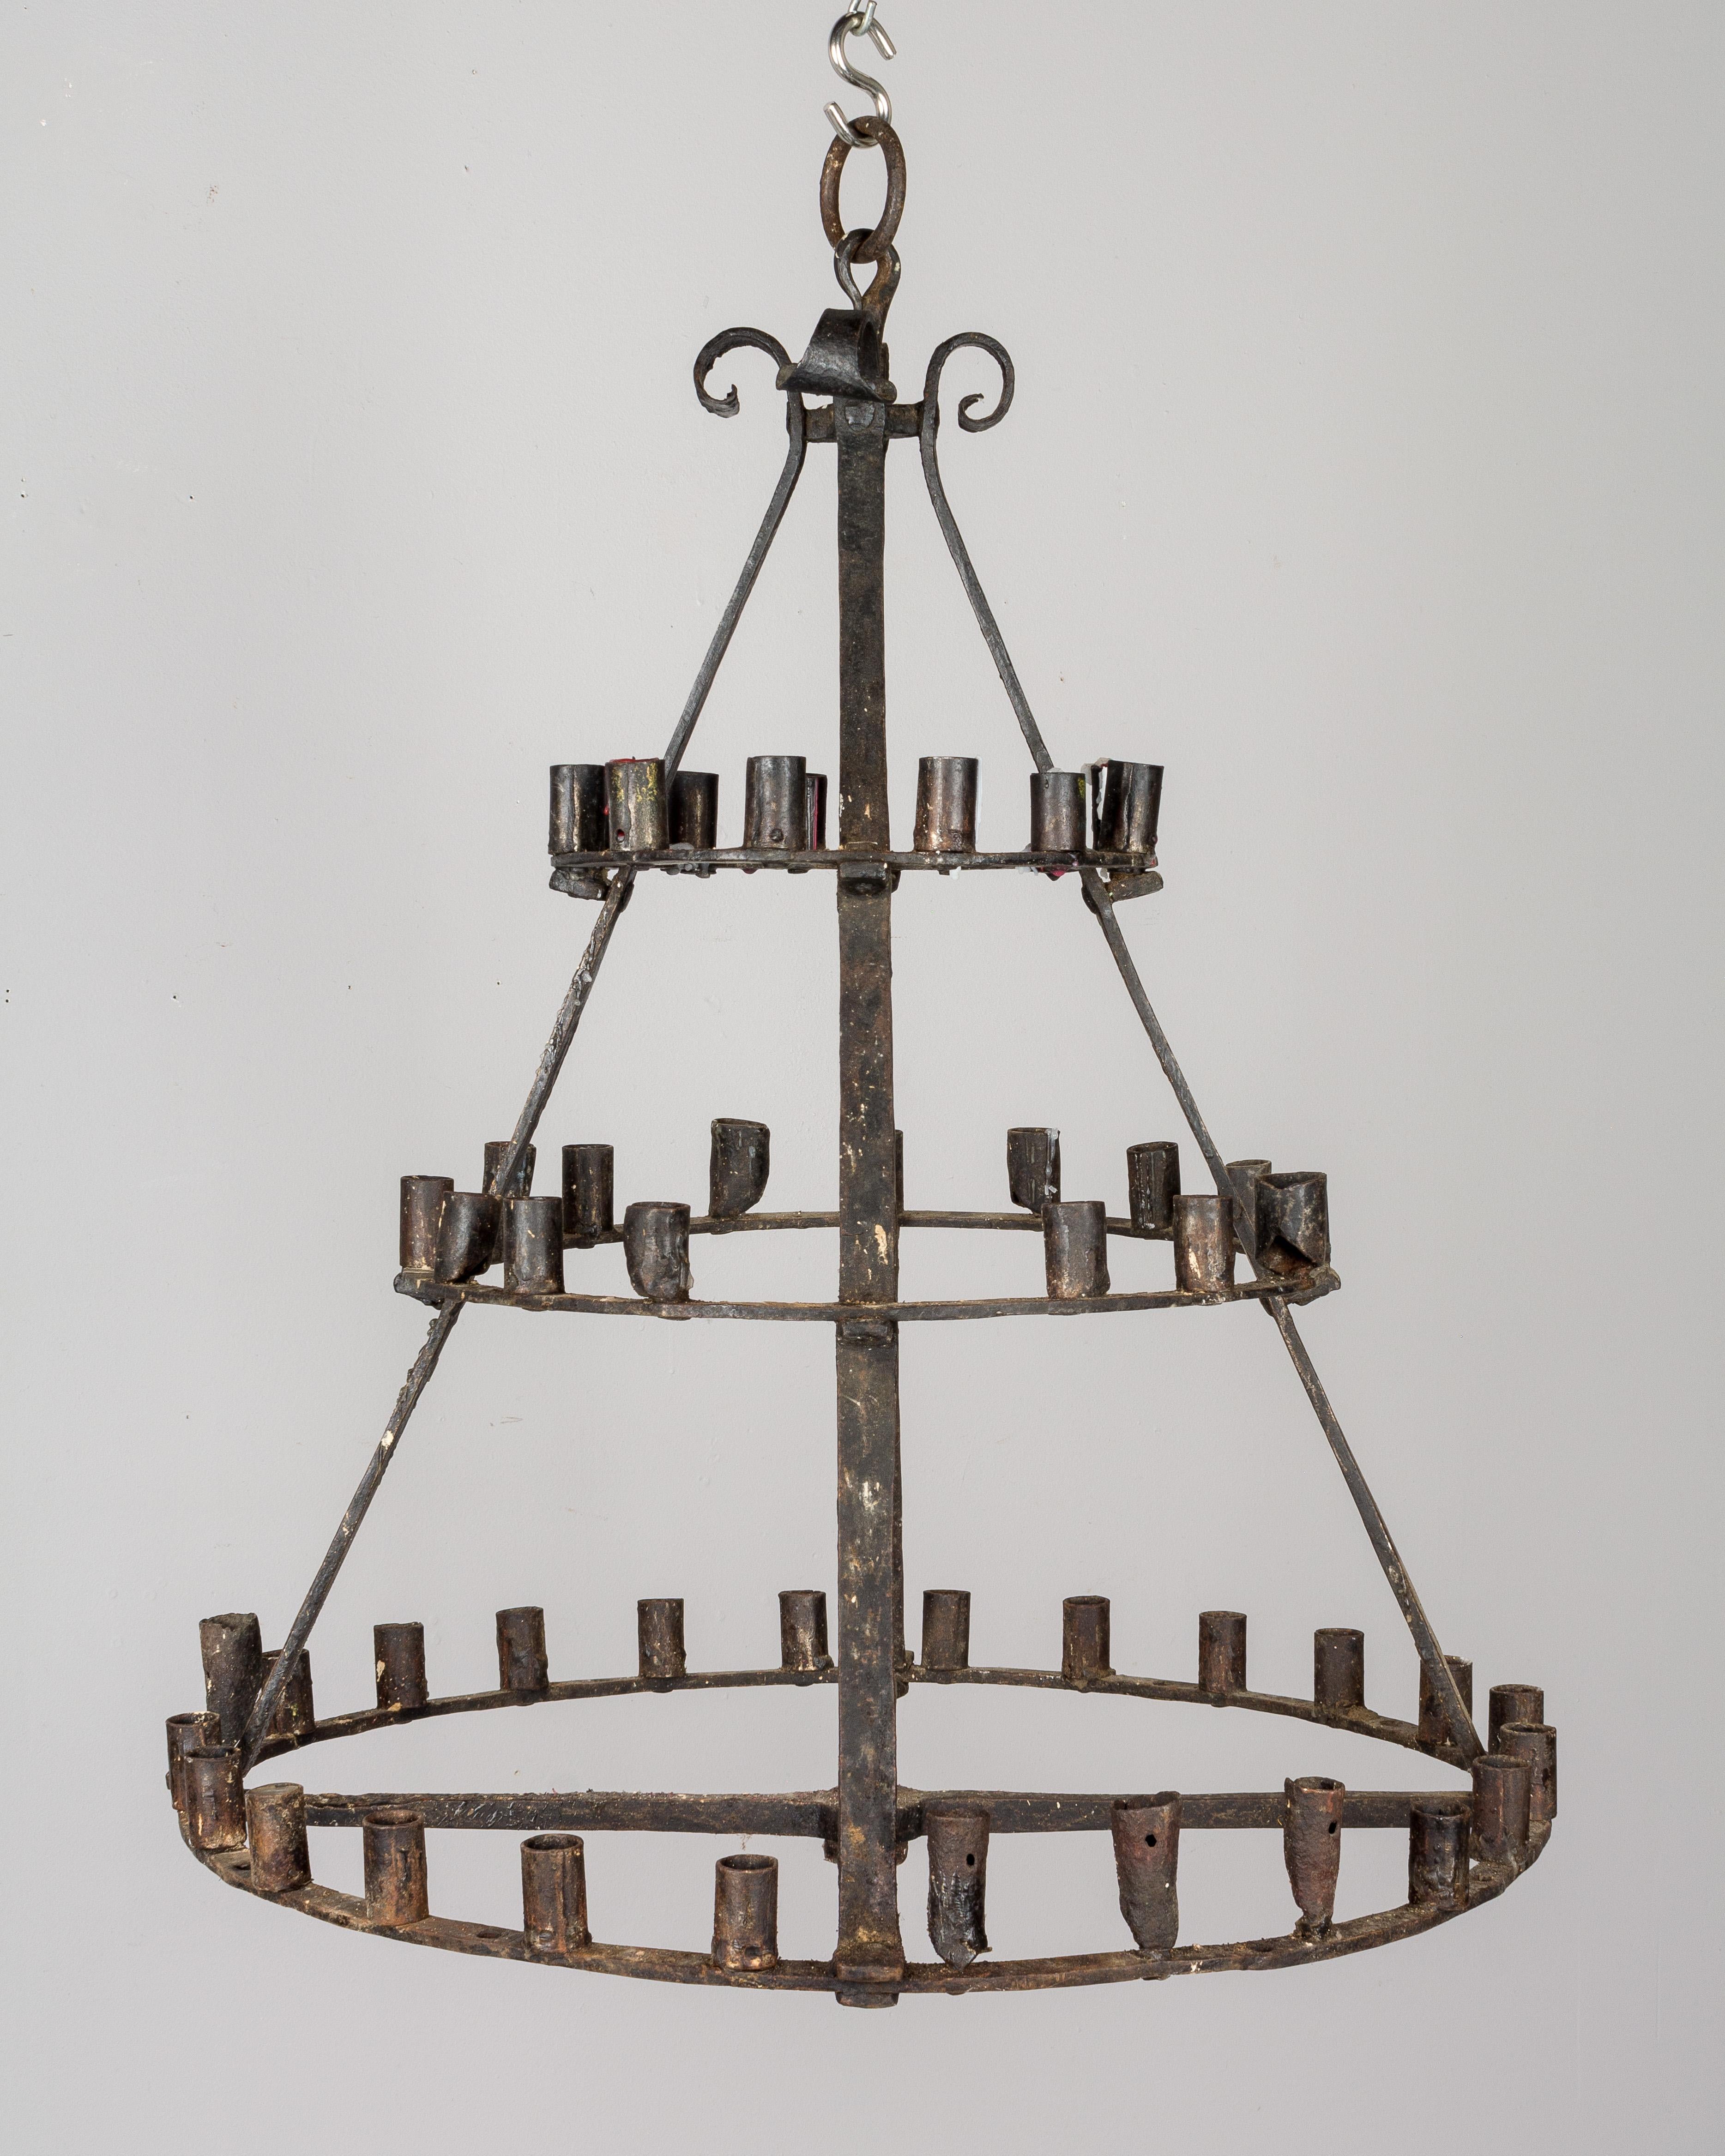 French Provincial 19th Century French Wrought Iron Candle Chandelier